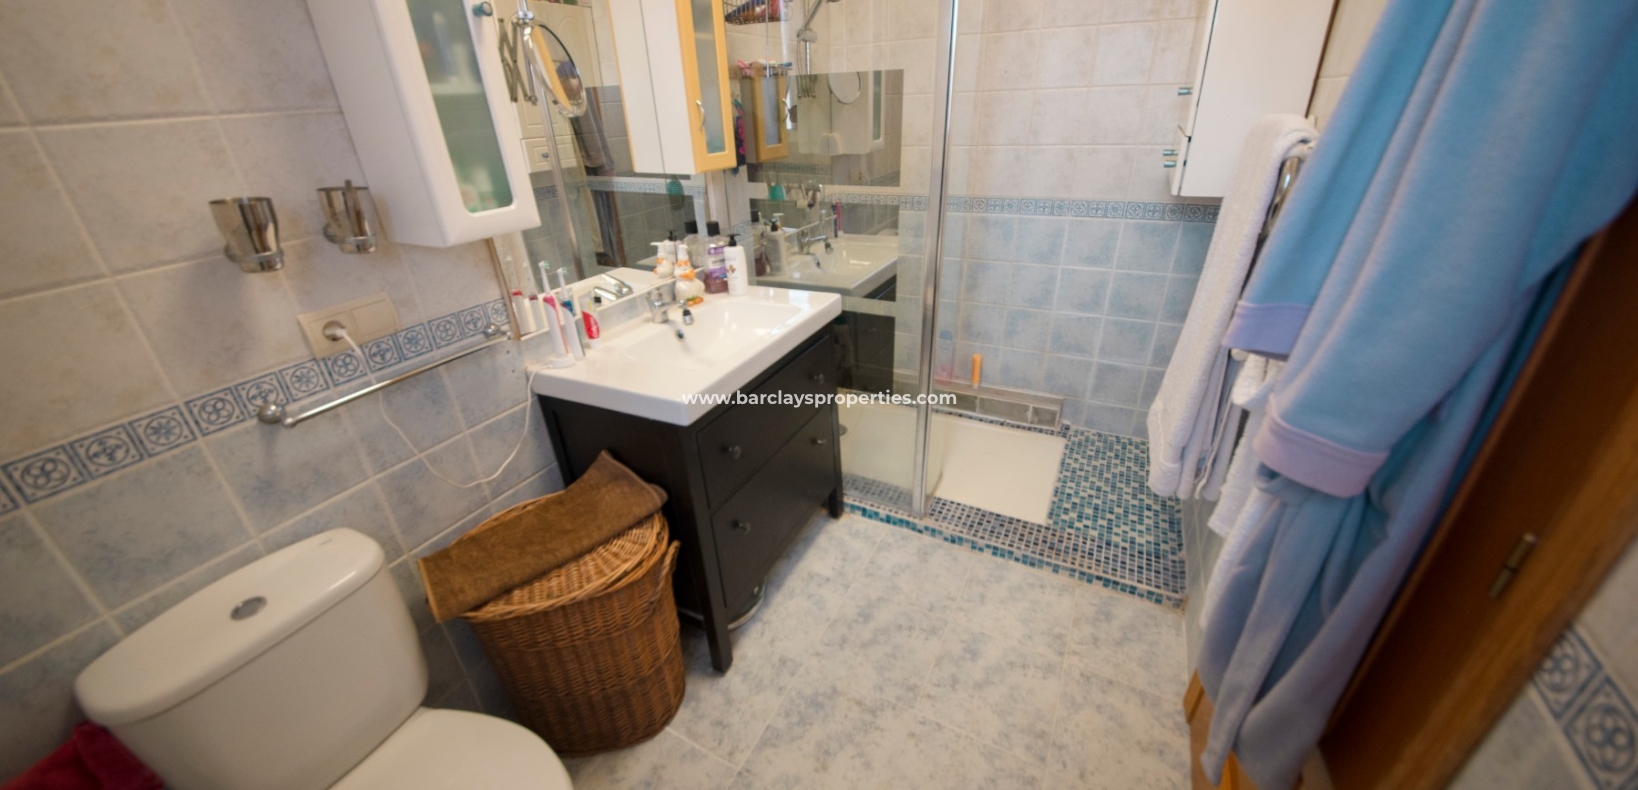 Bathroom - Country House For Sale in Catral, Spain